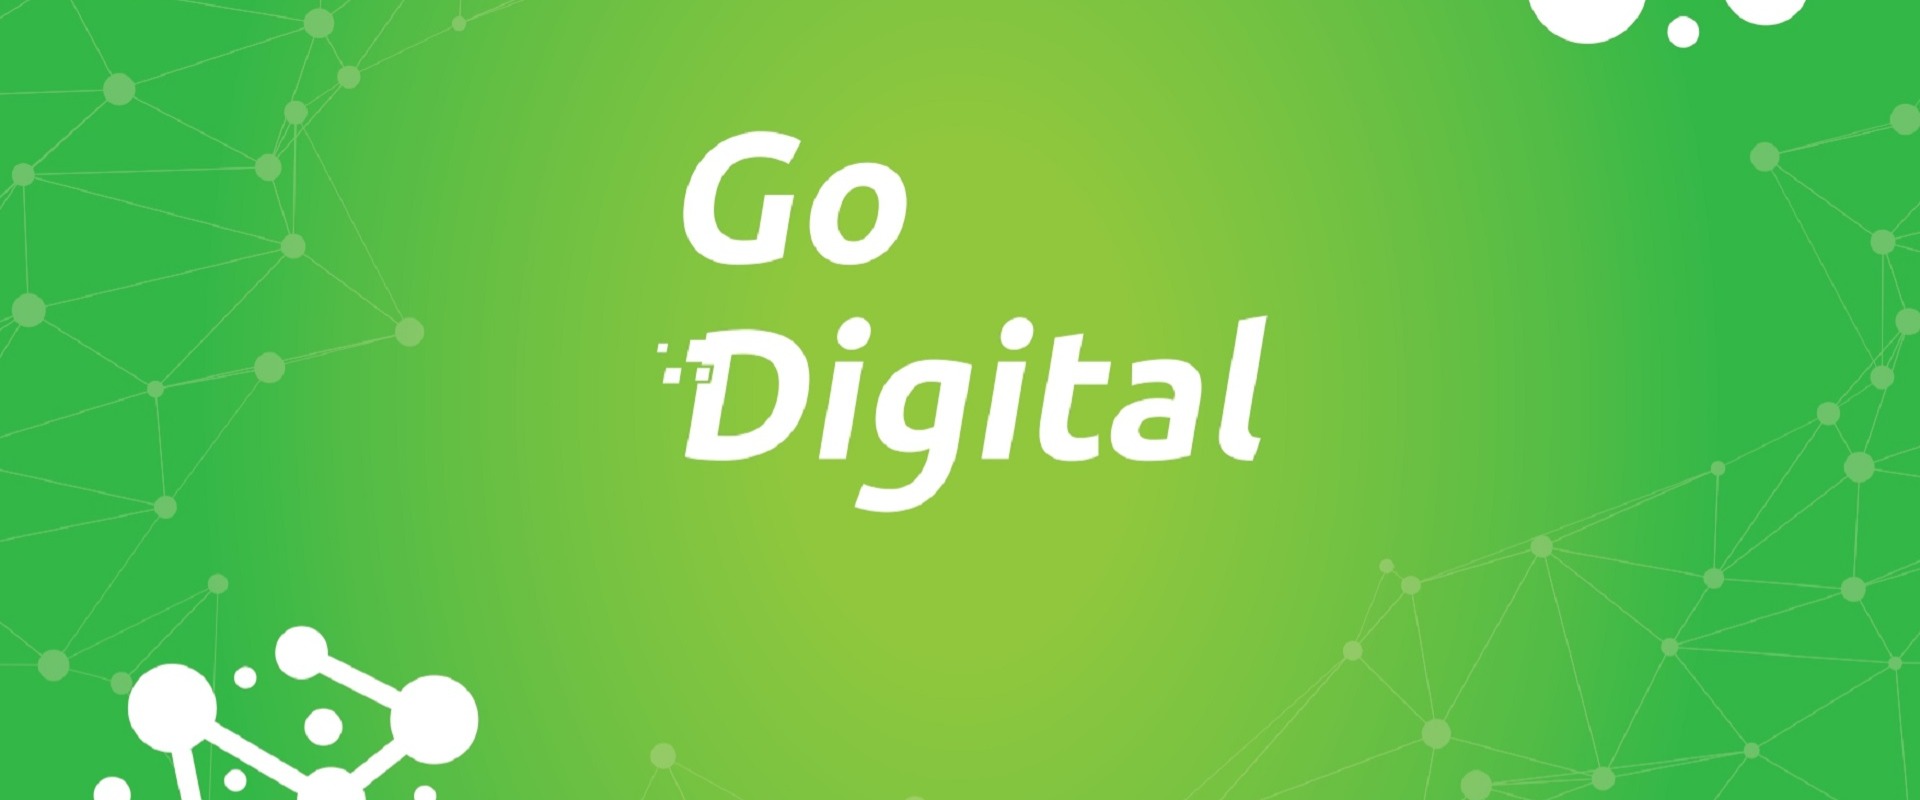 Invitation to attend virtually the launch of the Enterprise Go Digital project!